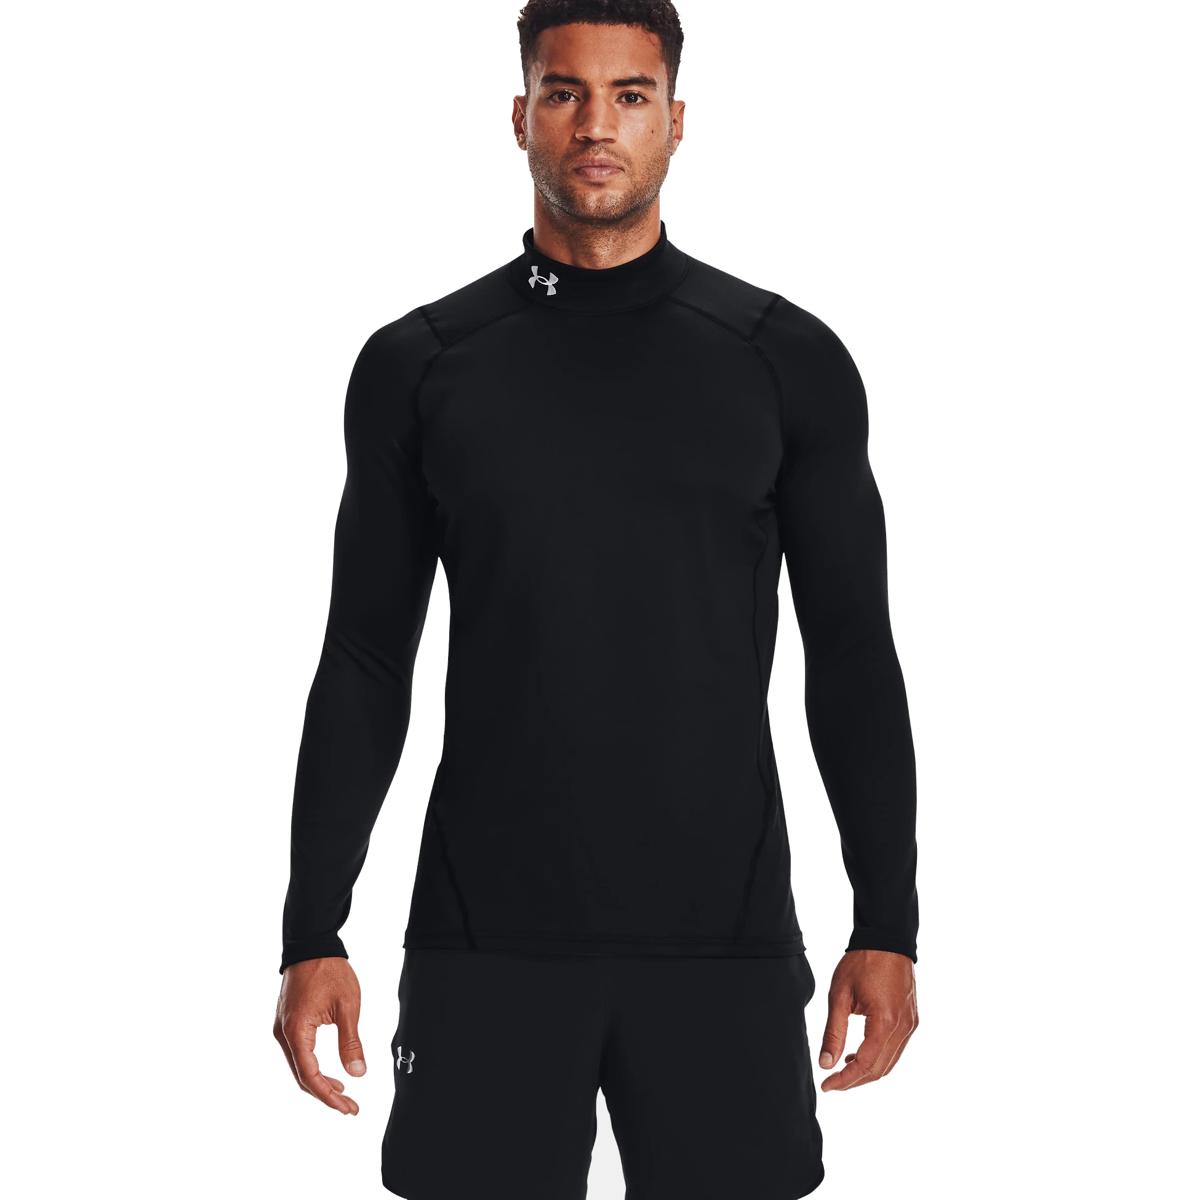 Under Armour Mens CG ARMOUR FITTED MOCK BLACK - Paragon Sports